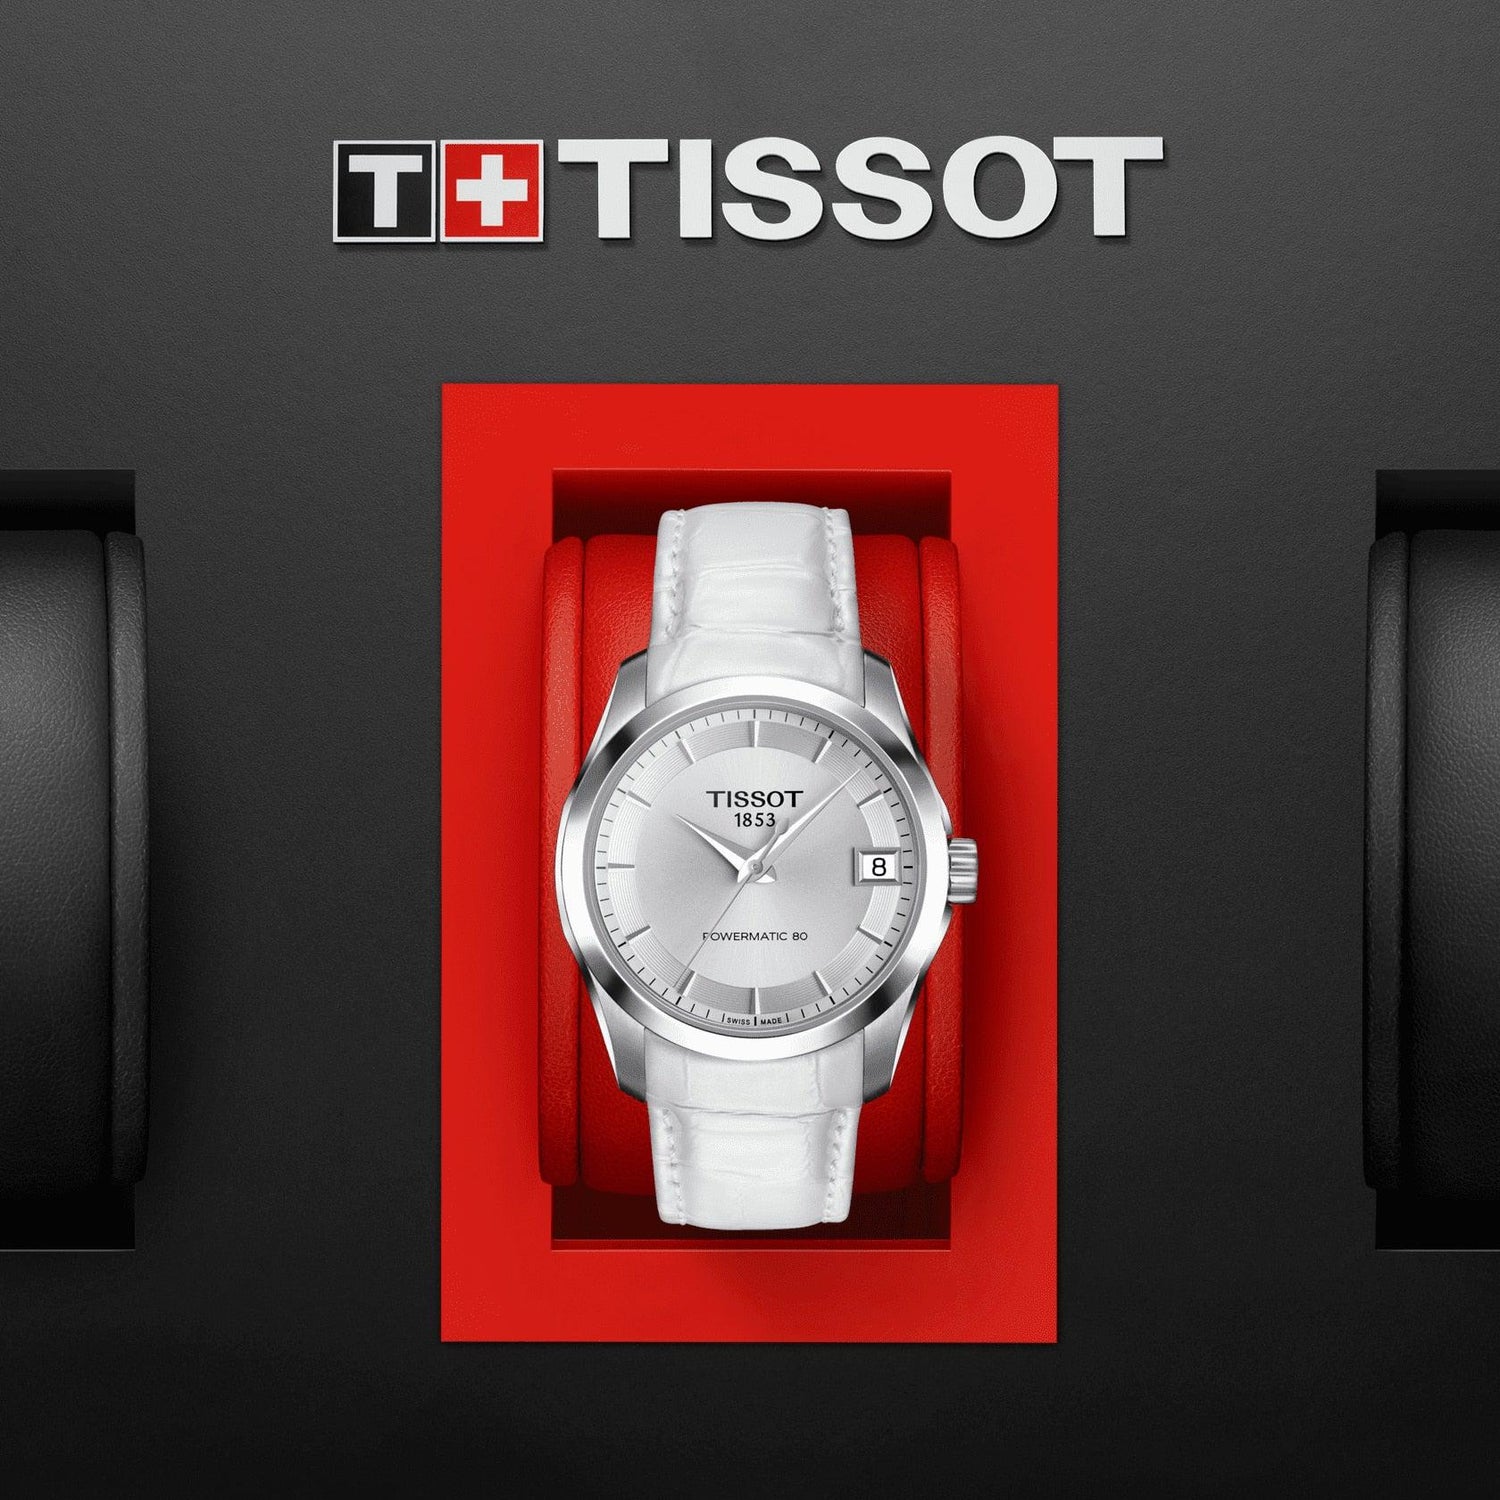 Tissot Couturier Powermatic 80 Lady